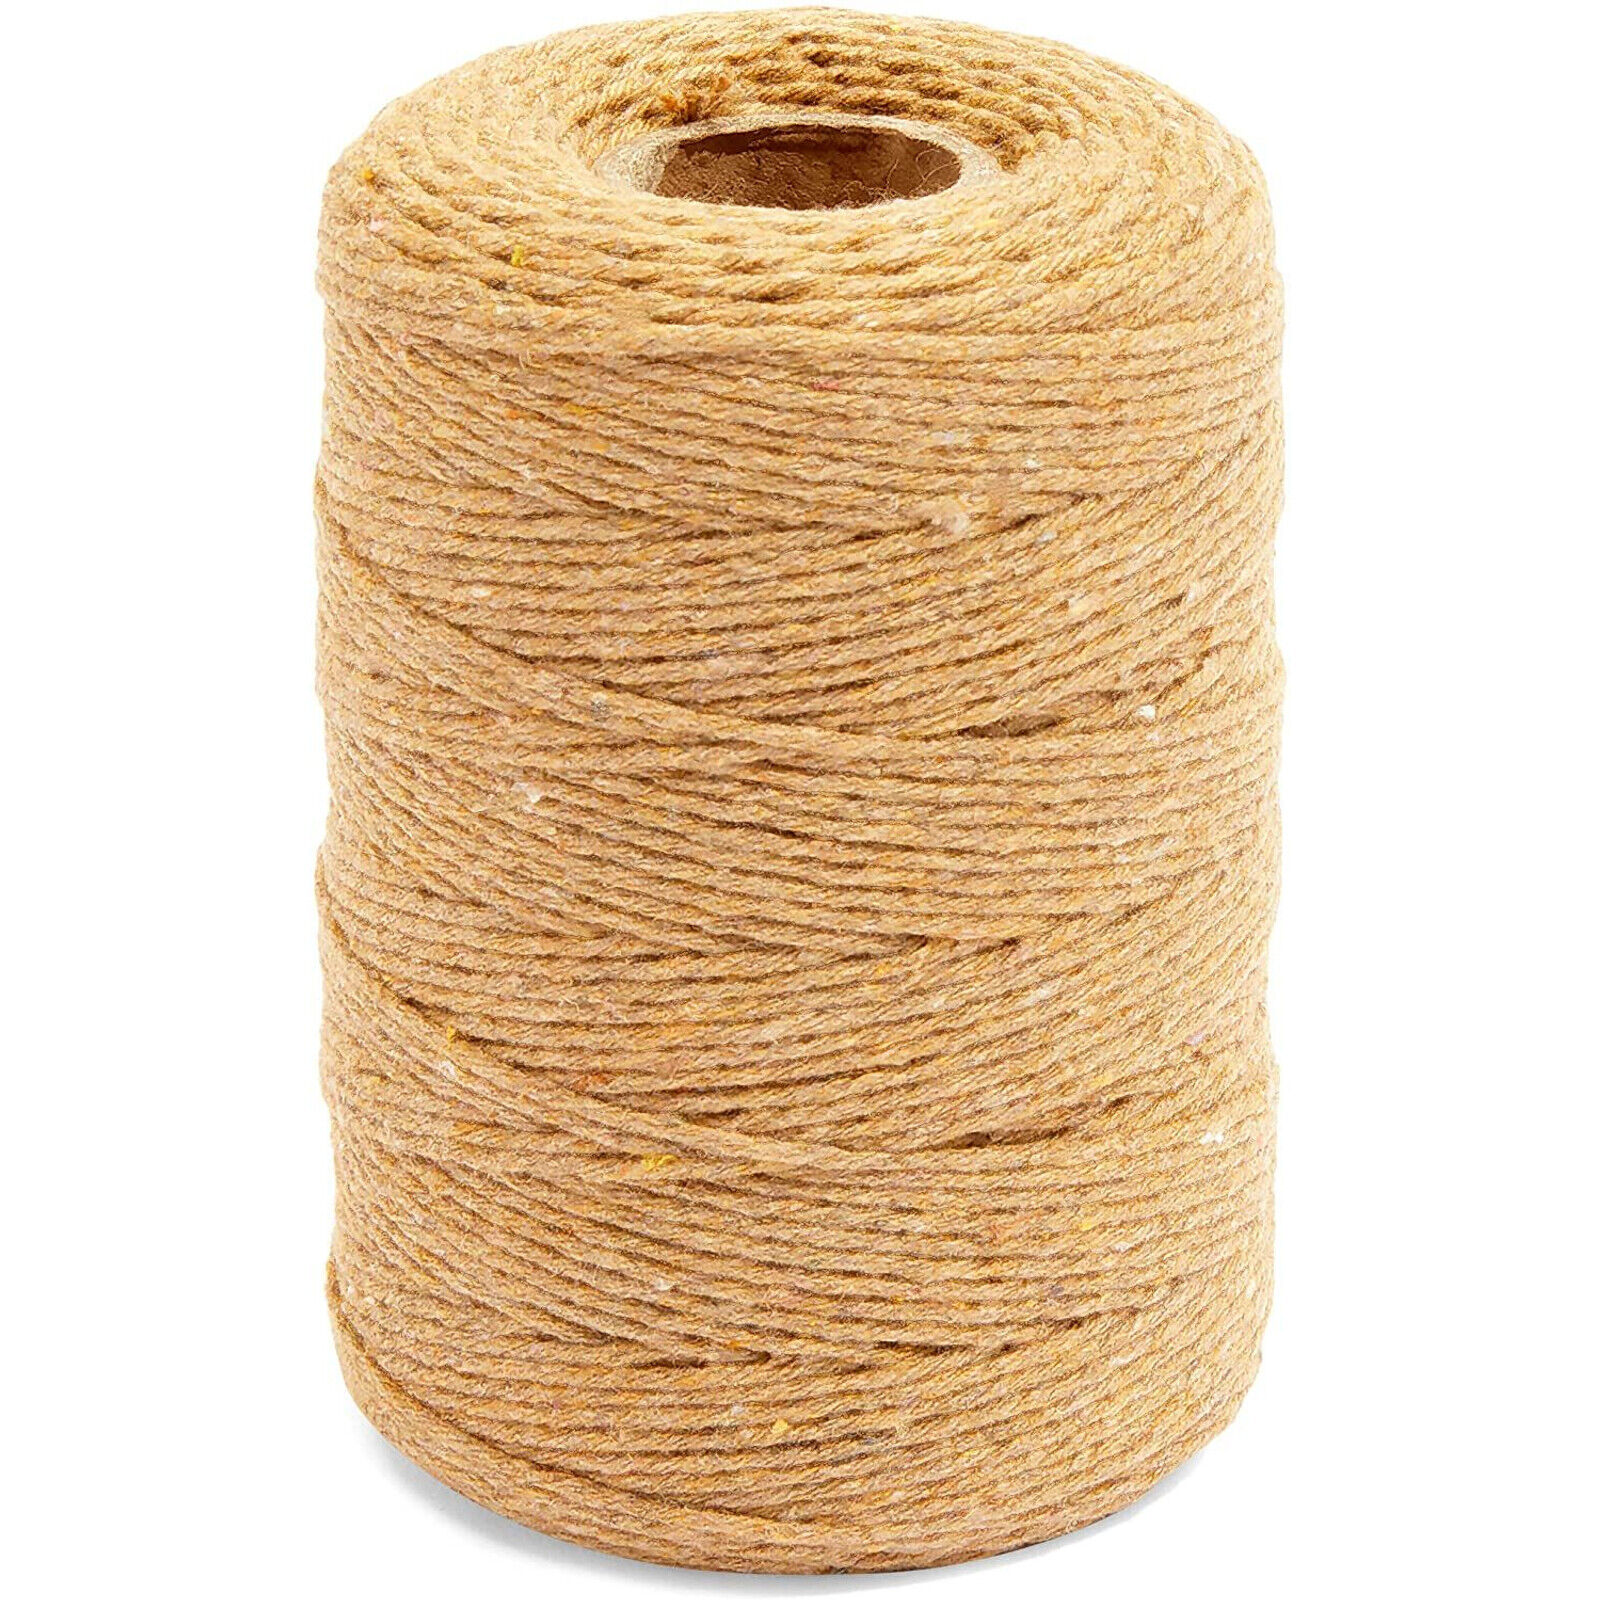 Natural Jute Twine String For Crafts Cord Packing Jewelry Making (2mm, 656 Ft)